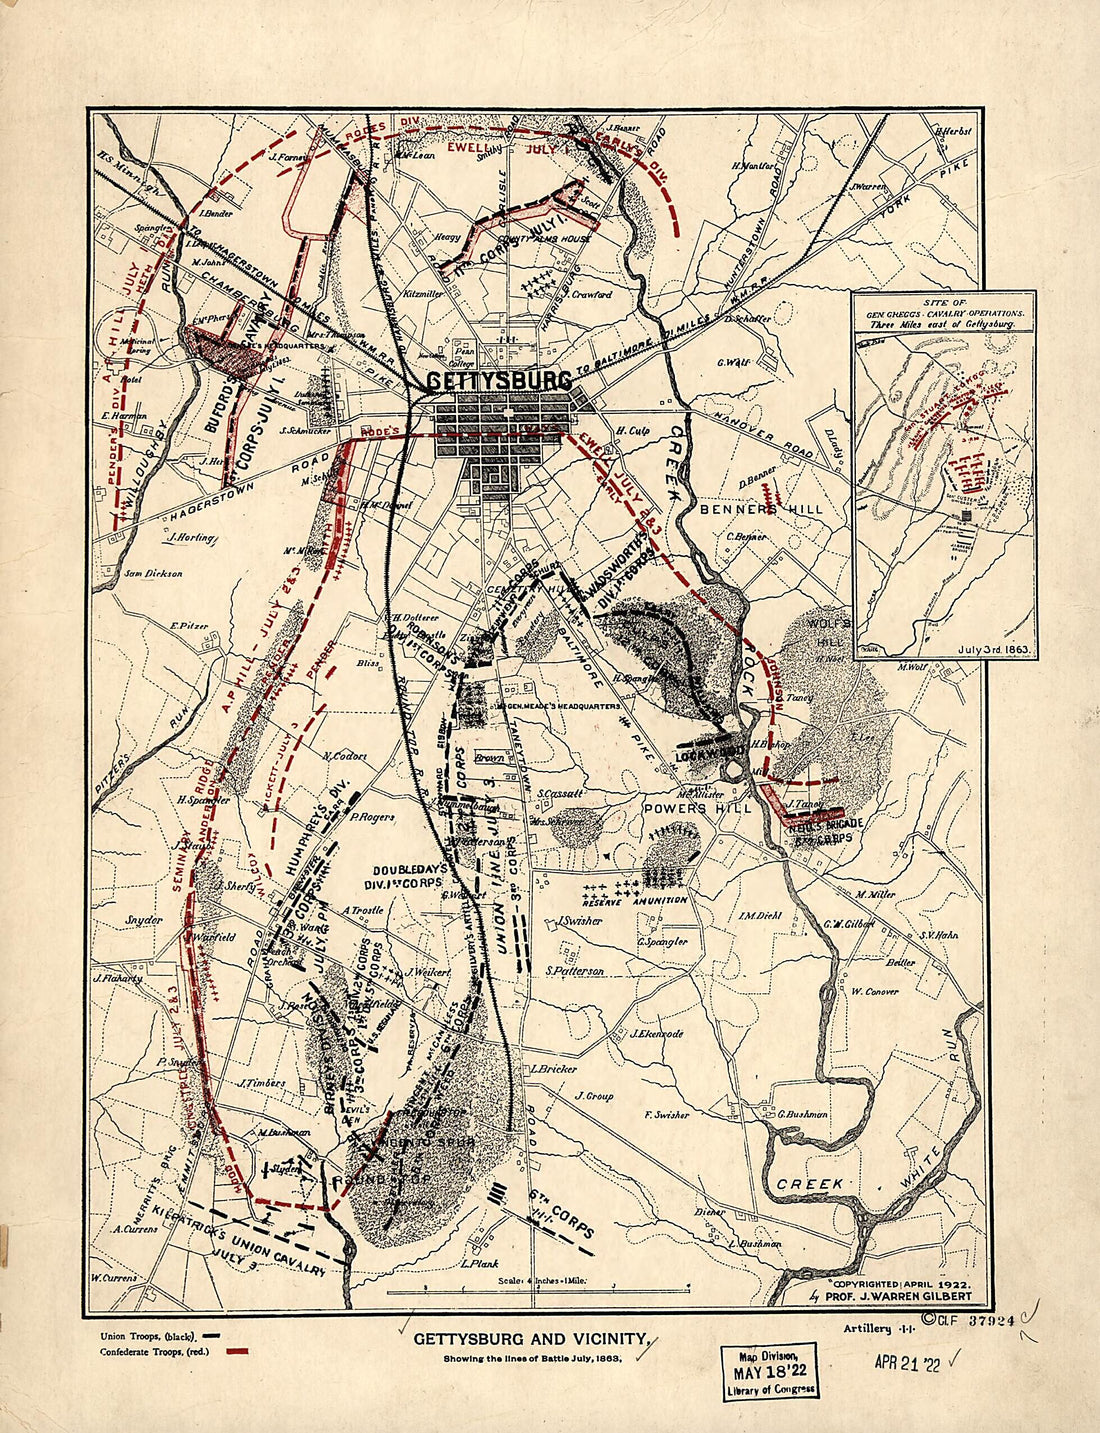 This old map of Gettysburg and Vicinity, Showing the Lines of Battle, July, from 1863 was created by J. Warren Gilbert in 1863